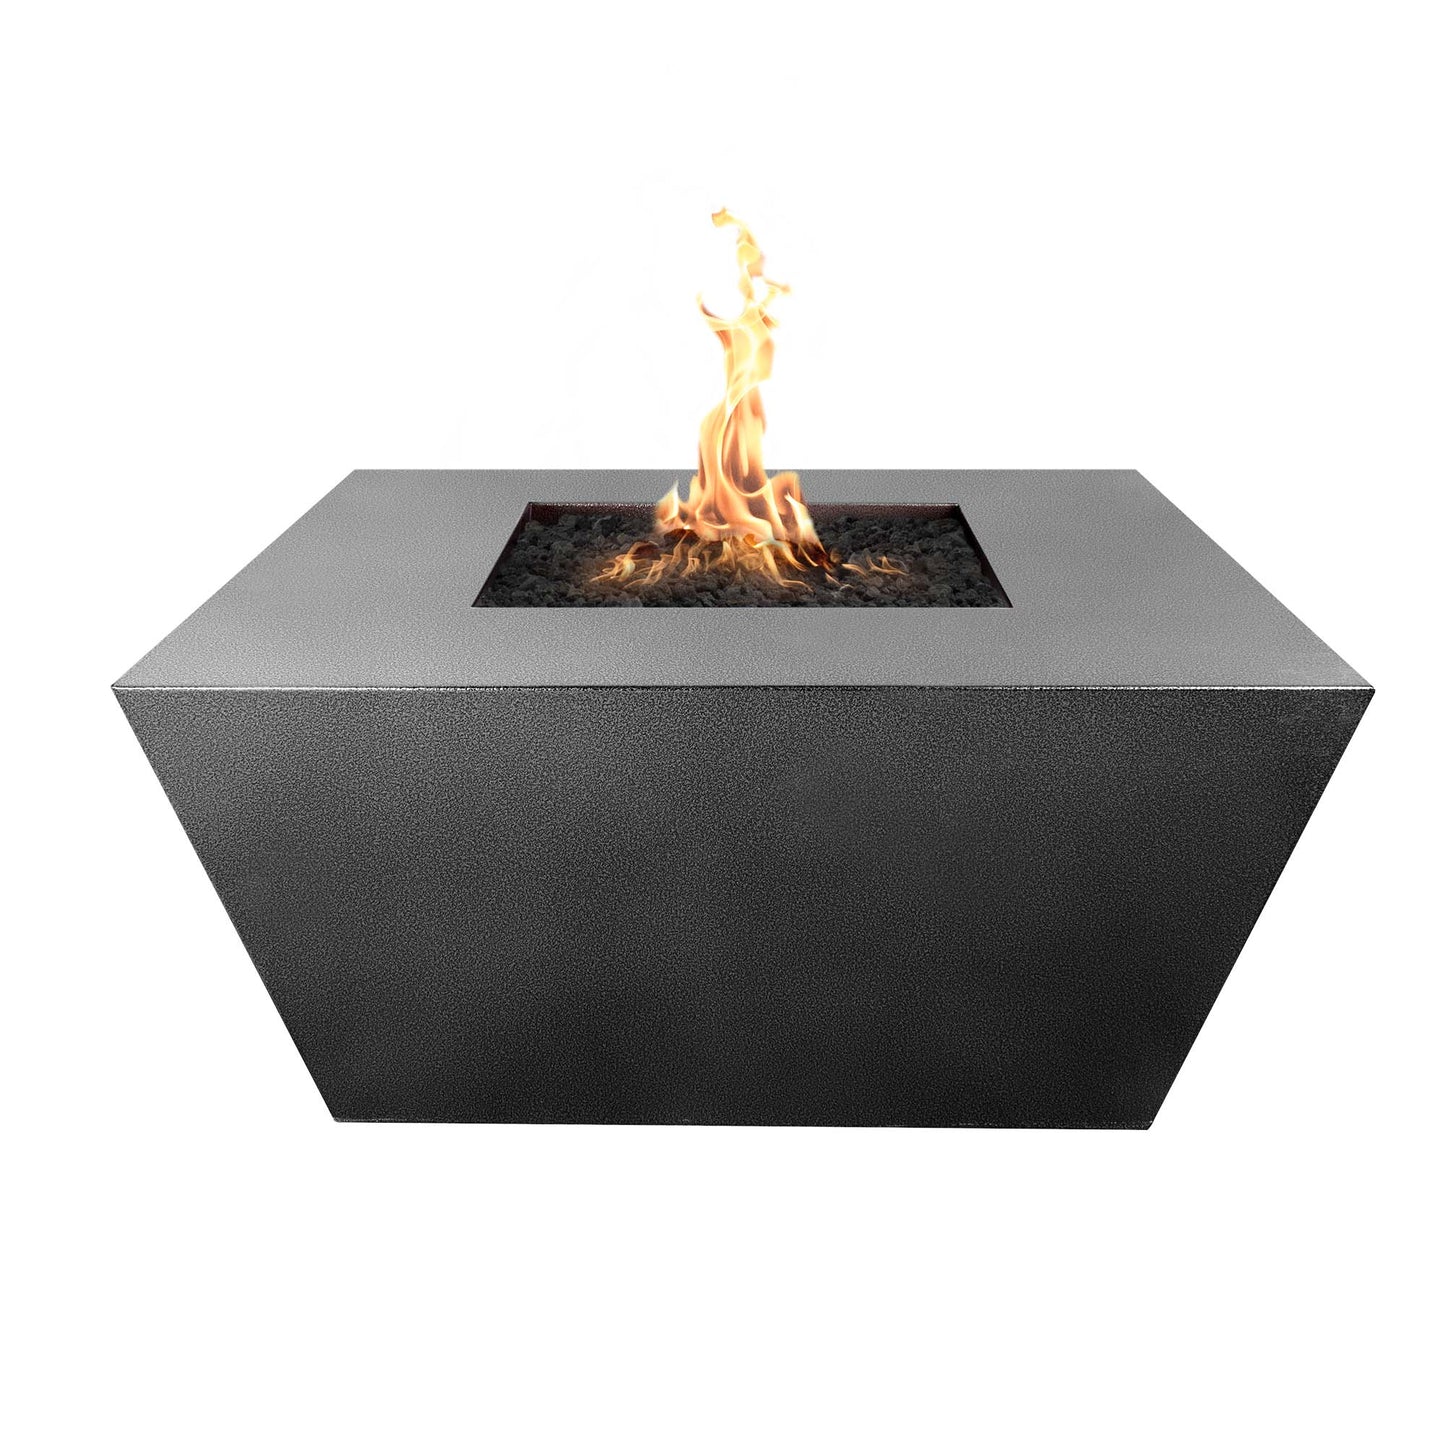 The Outdoor Plus Square Redan 36" Corten Steel Natural Gas Fire Pit with Match Lit with Flame Sense Ignition